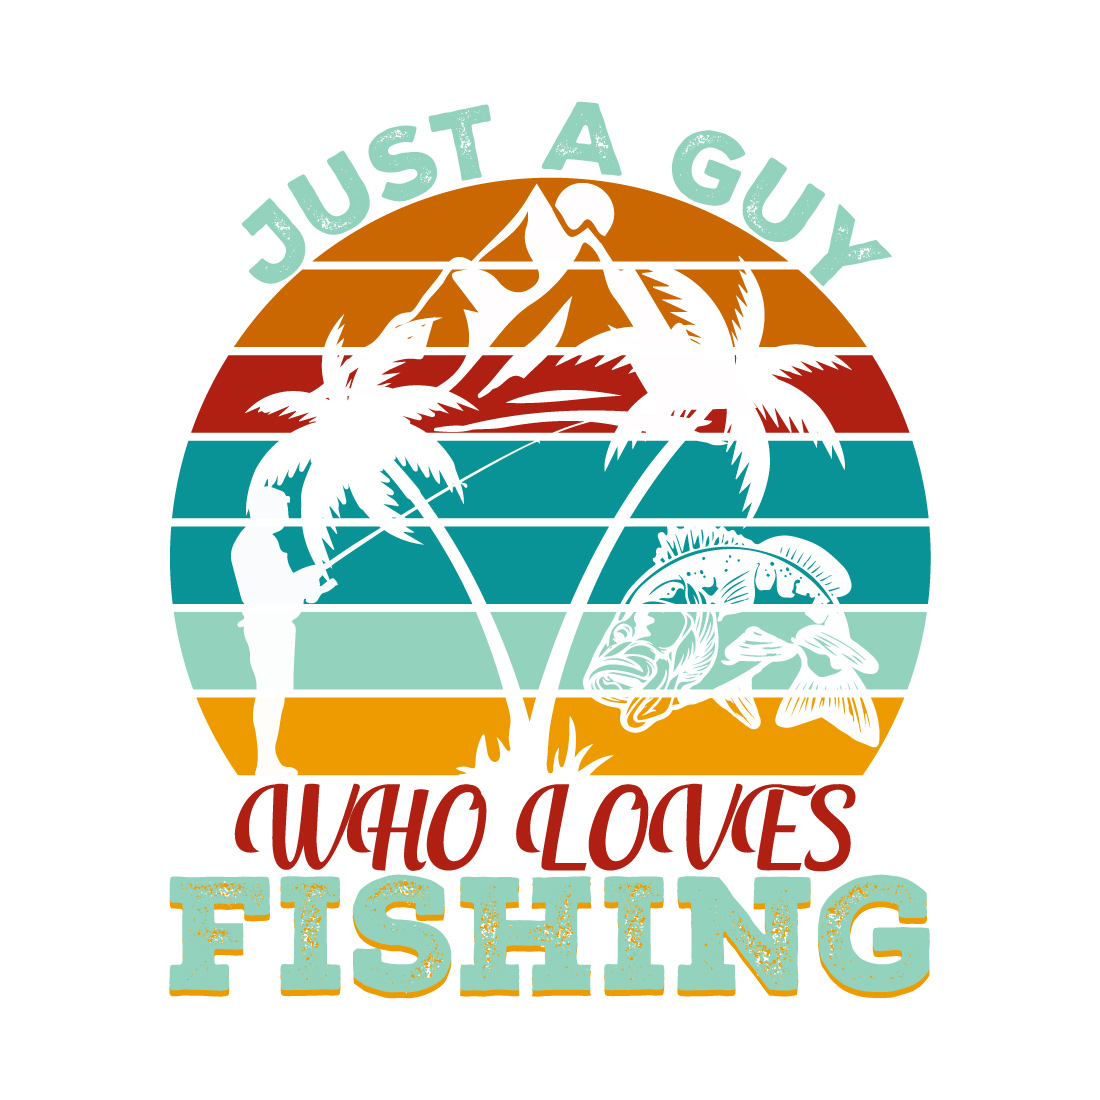 Fishing T-shirt Design preview image.